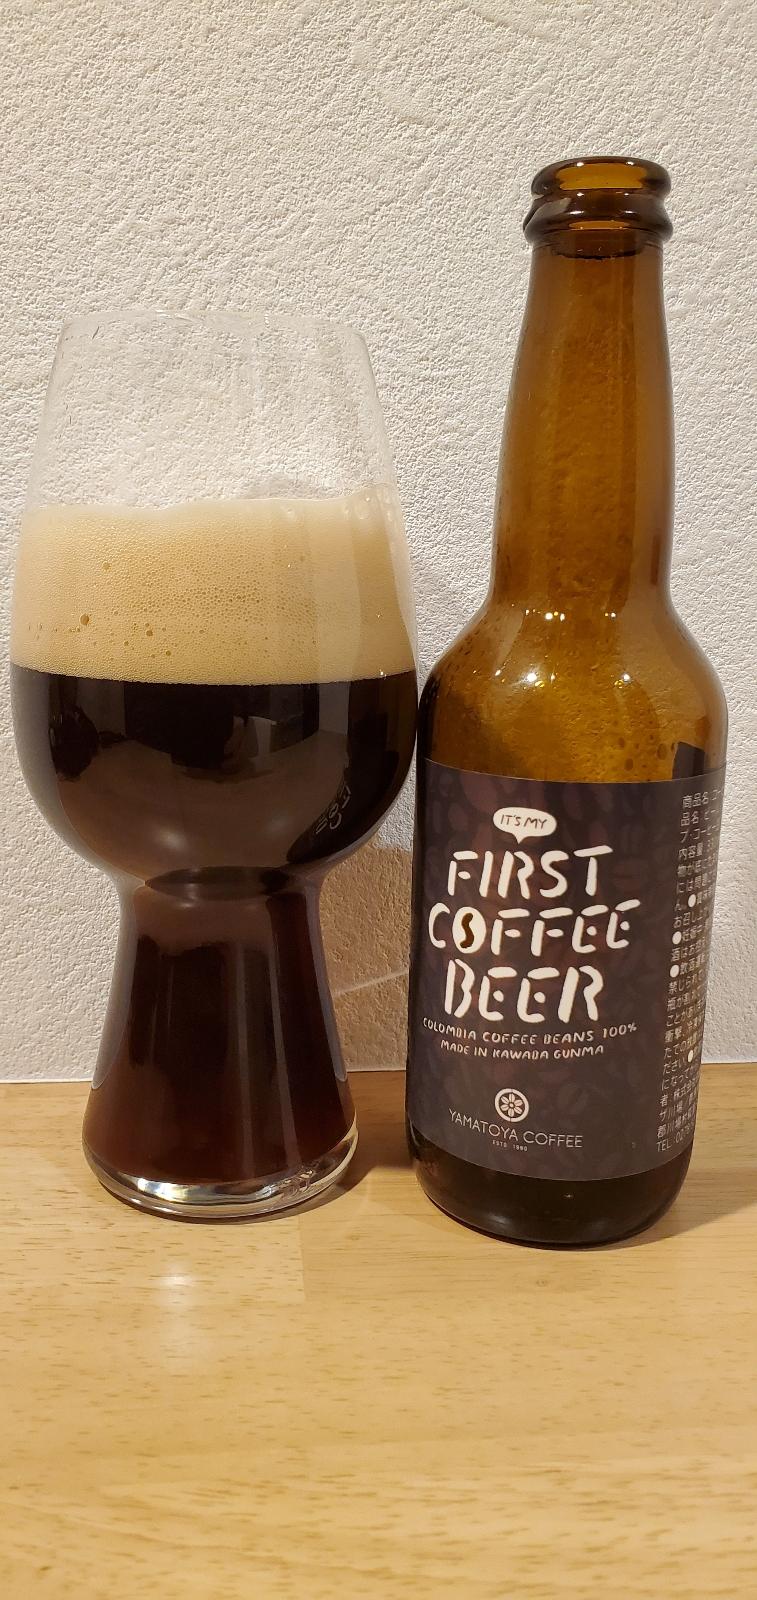 First Coffee Beer